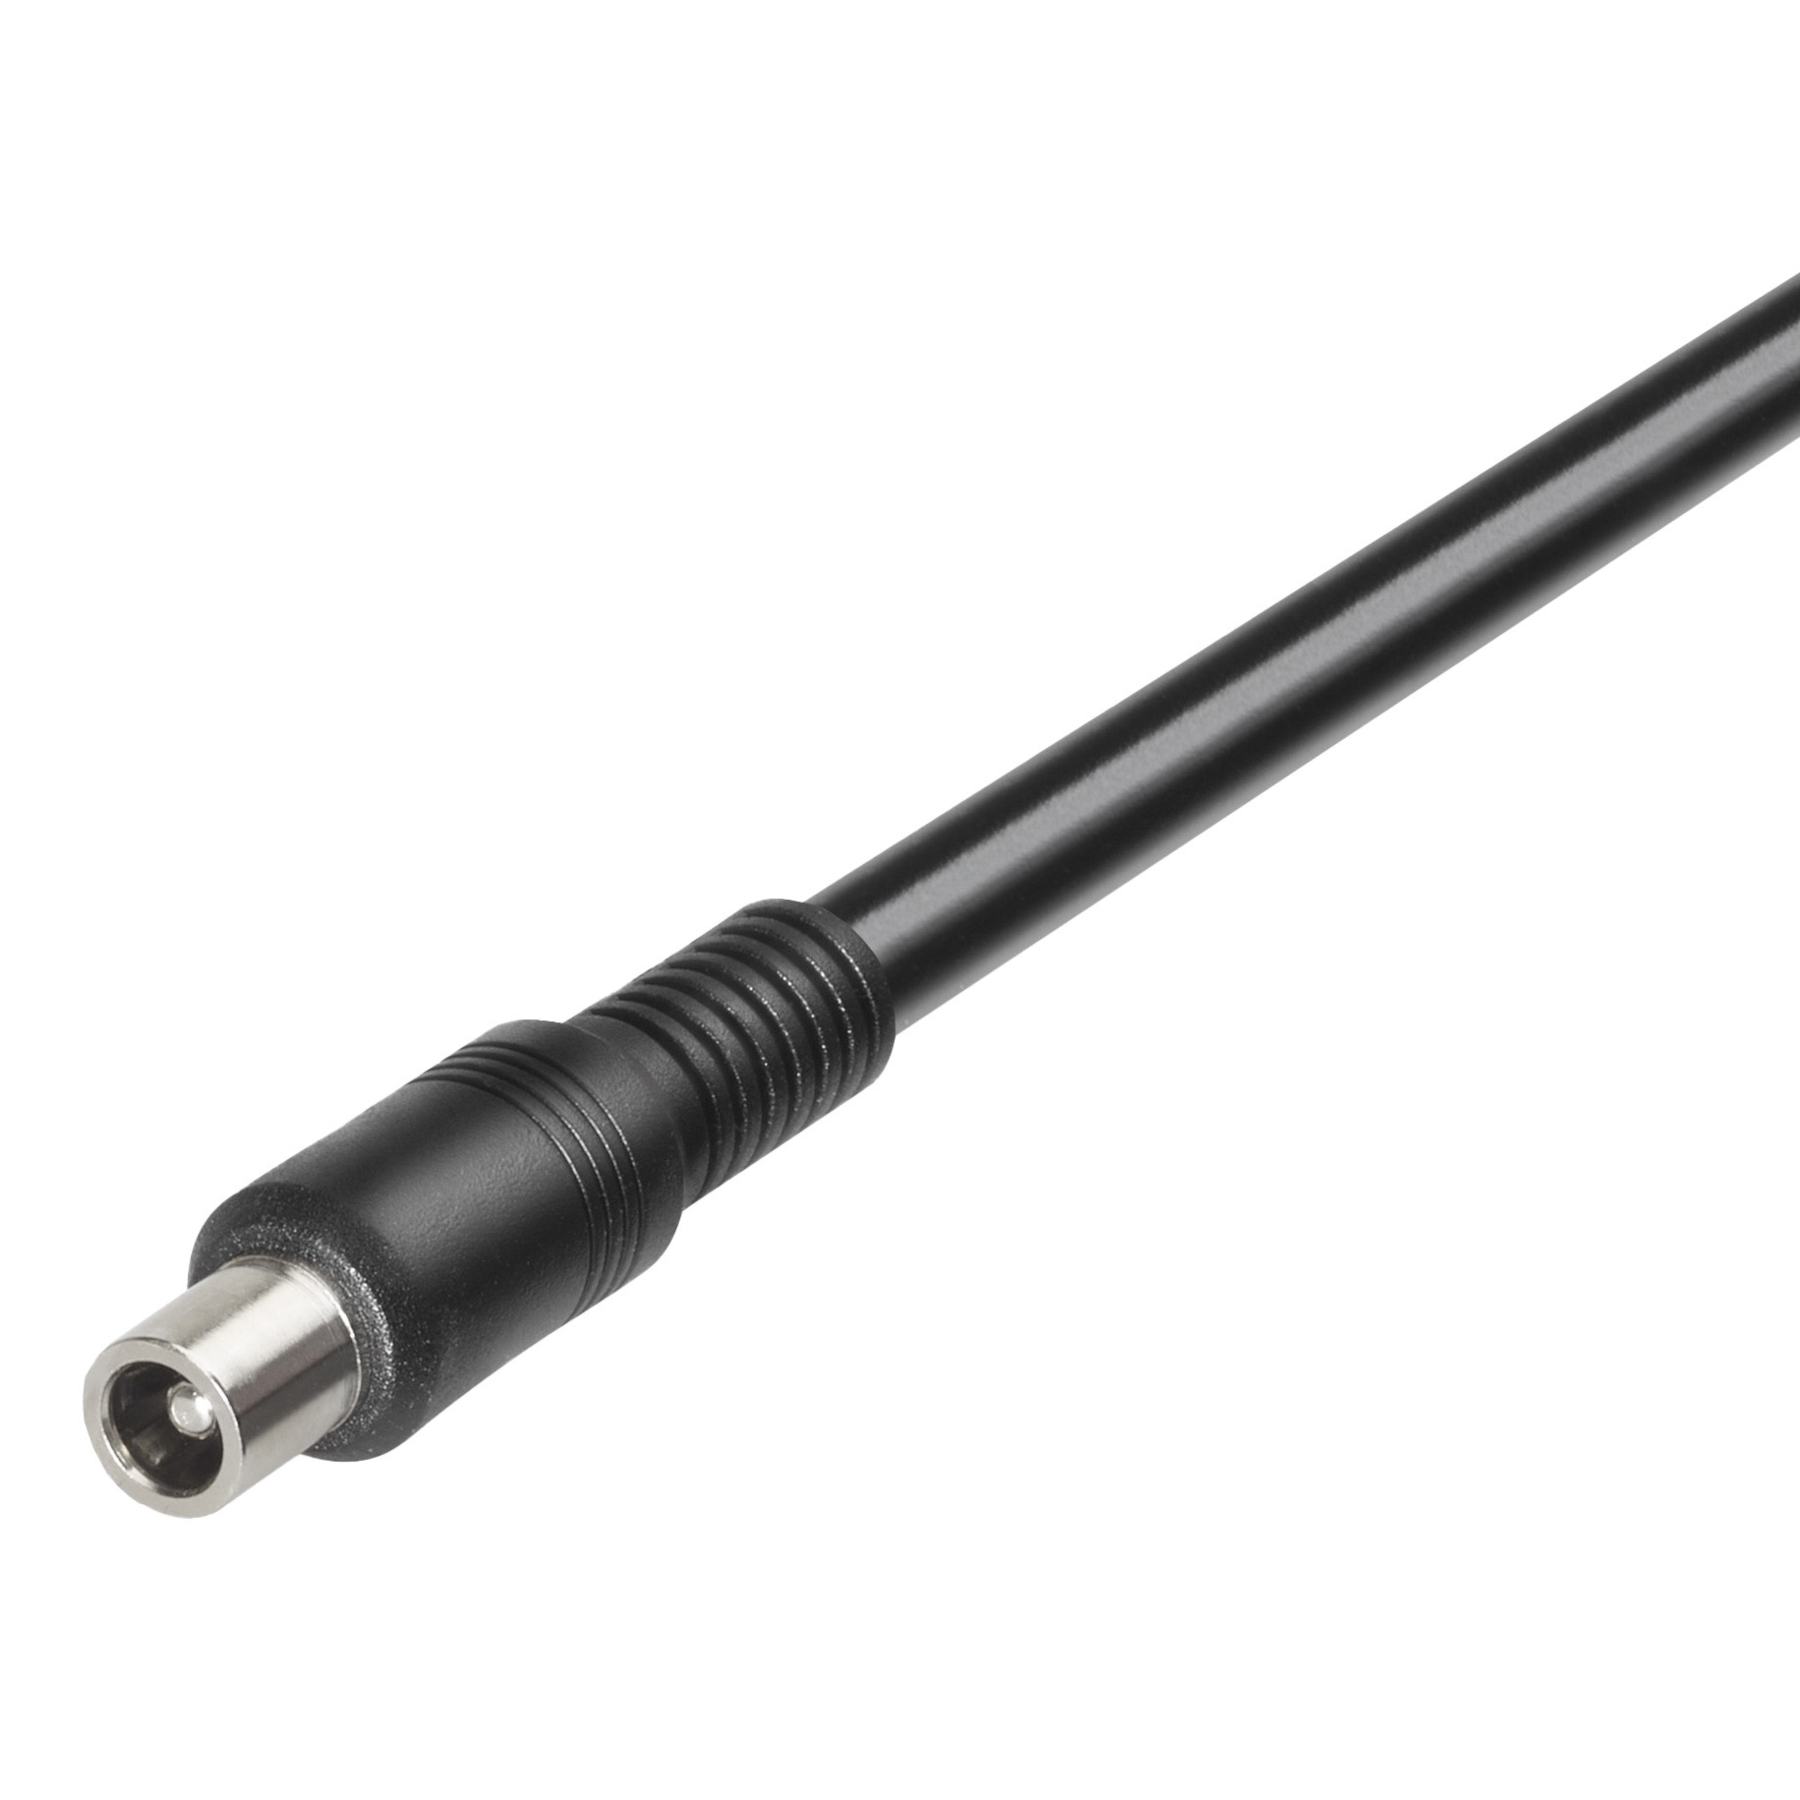 Productfoto van ONgineer Secondary Cable for LiON Smart Charger - Coaxial 8 x 9